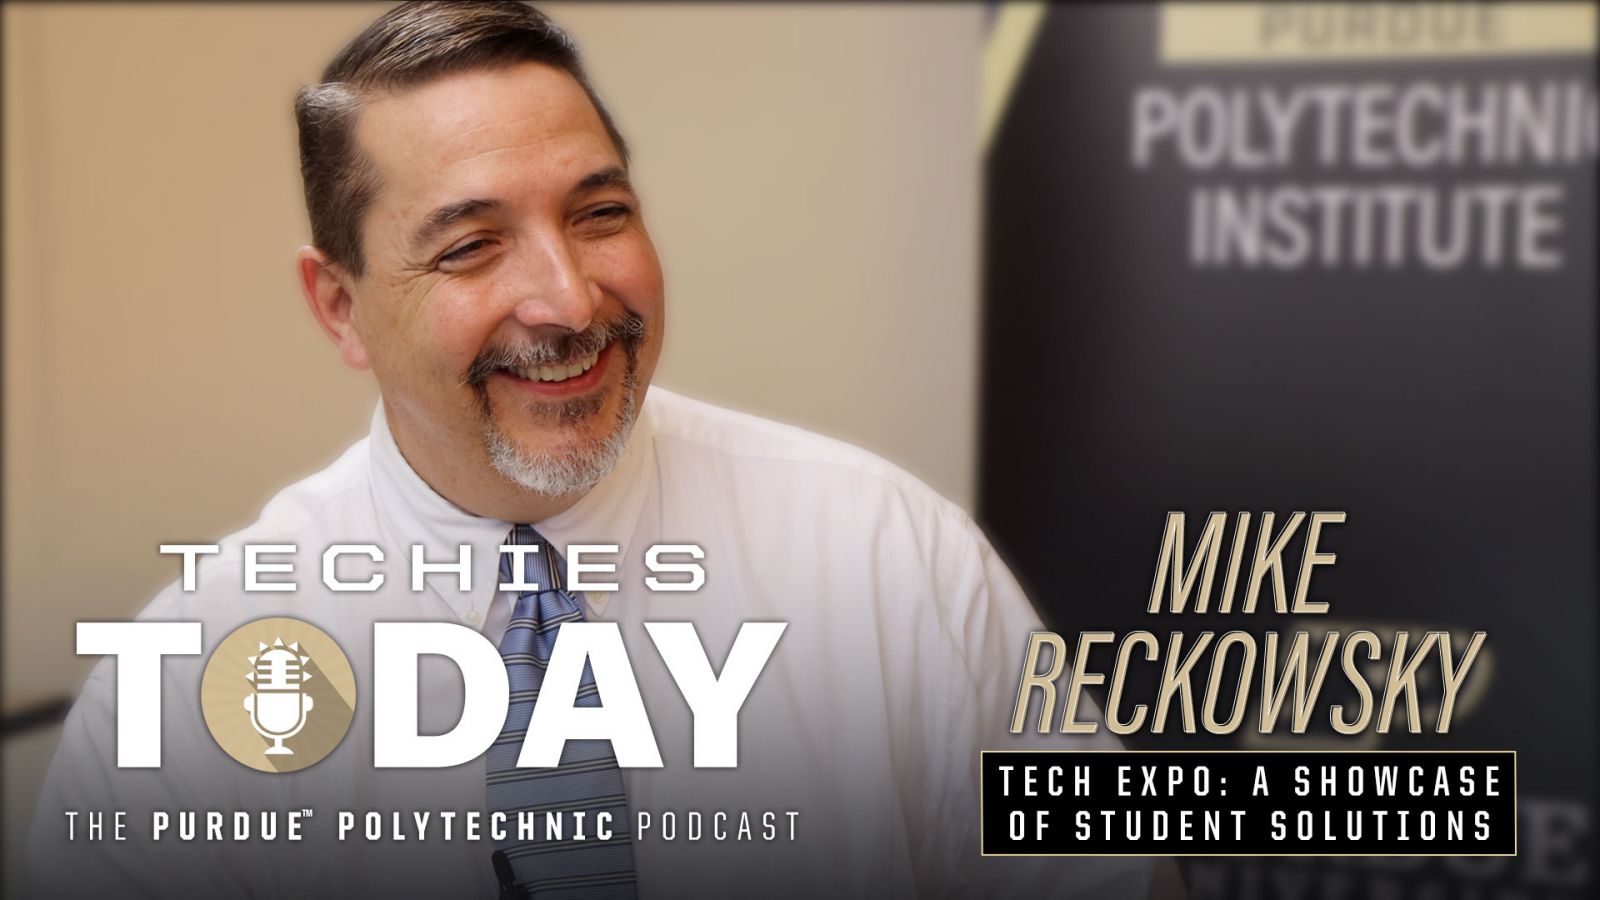 Mike Reckowsky & Tech Expo, a showcase of student solutions, on Techies Today, Purdue Polytechnic Podcast